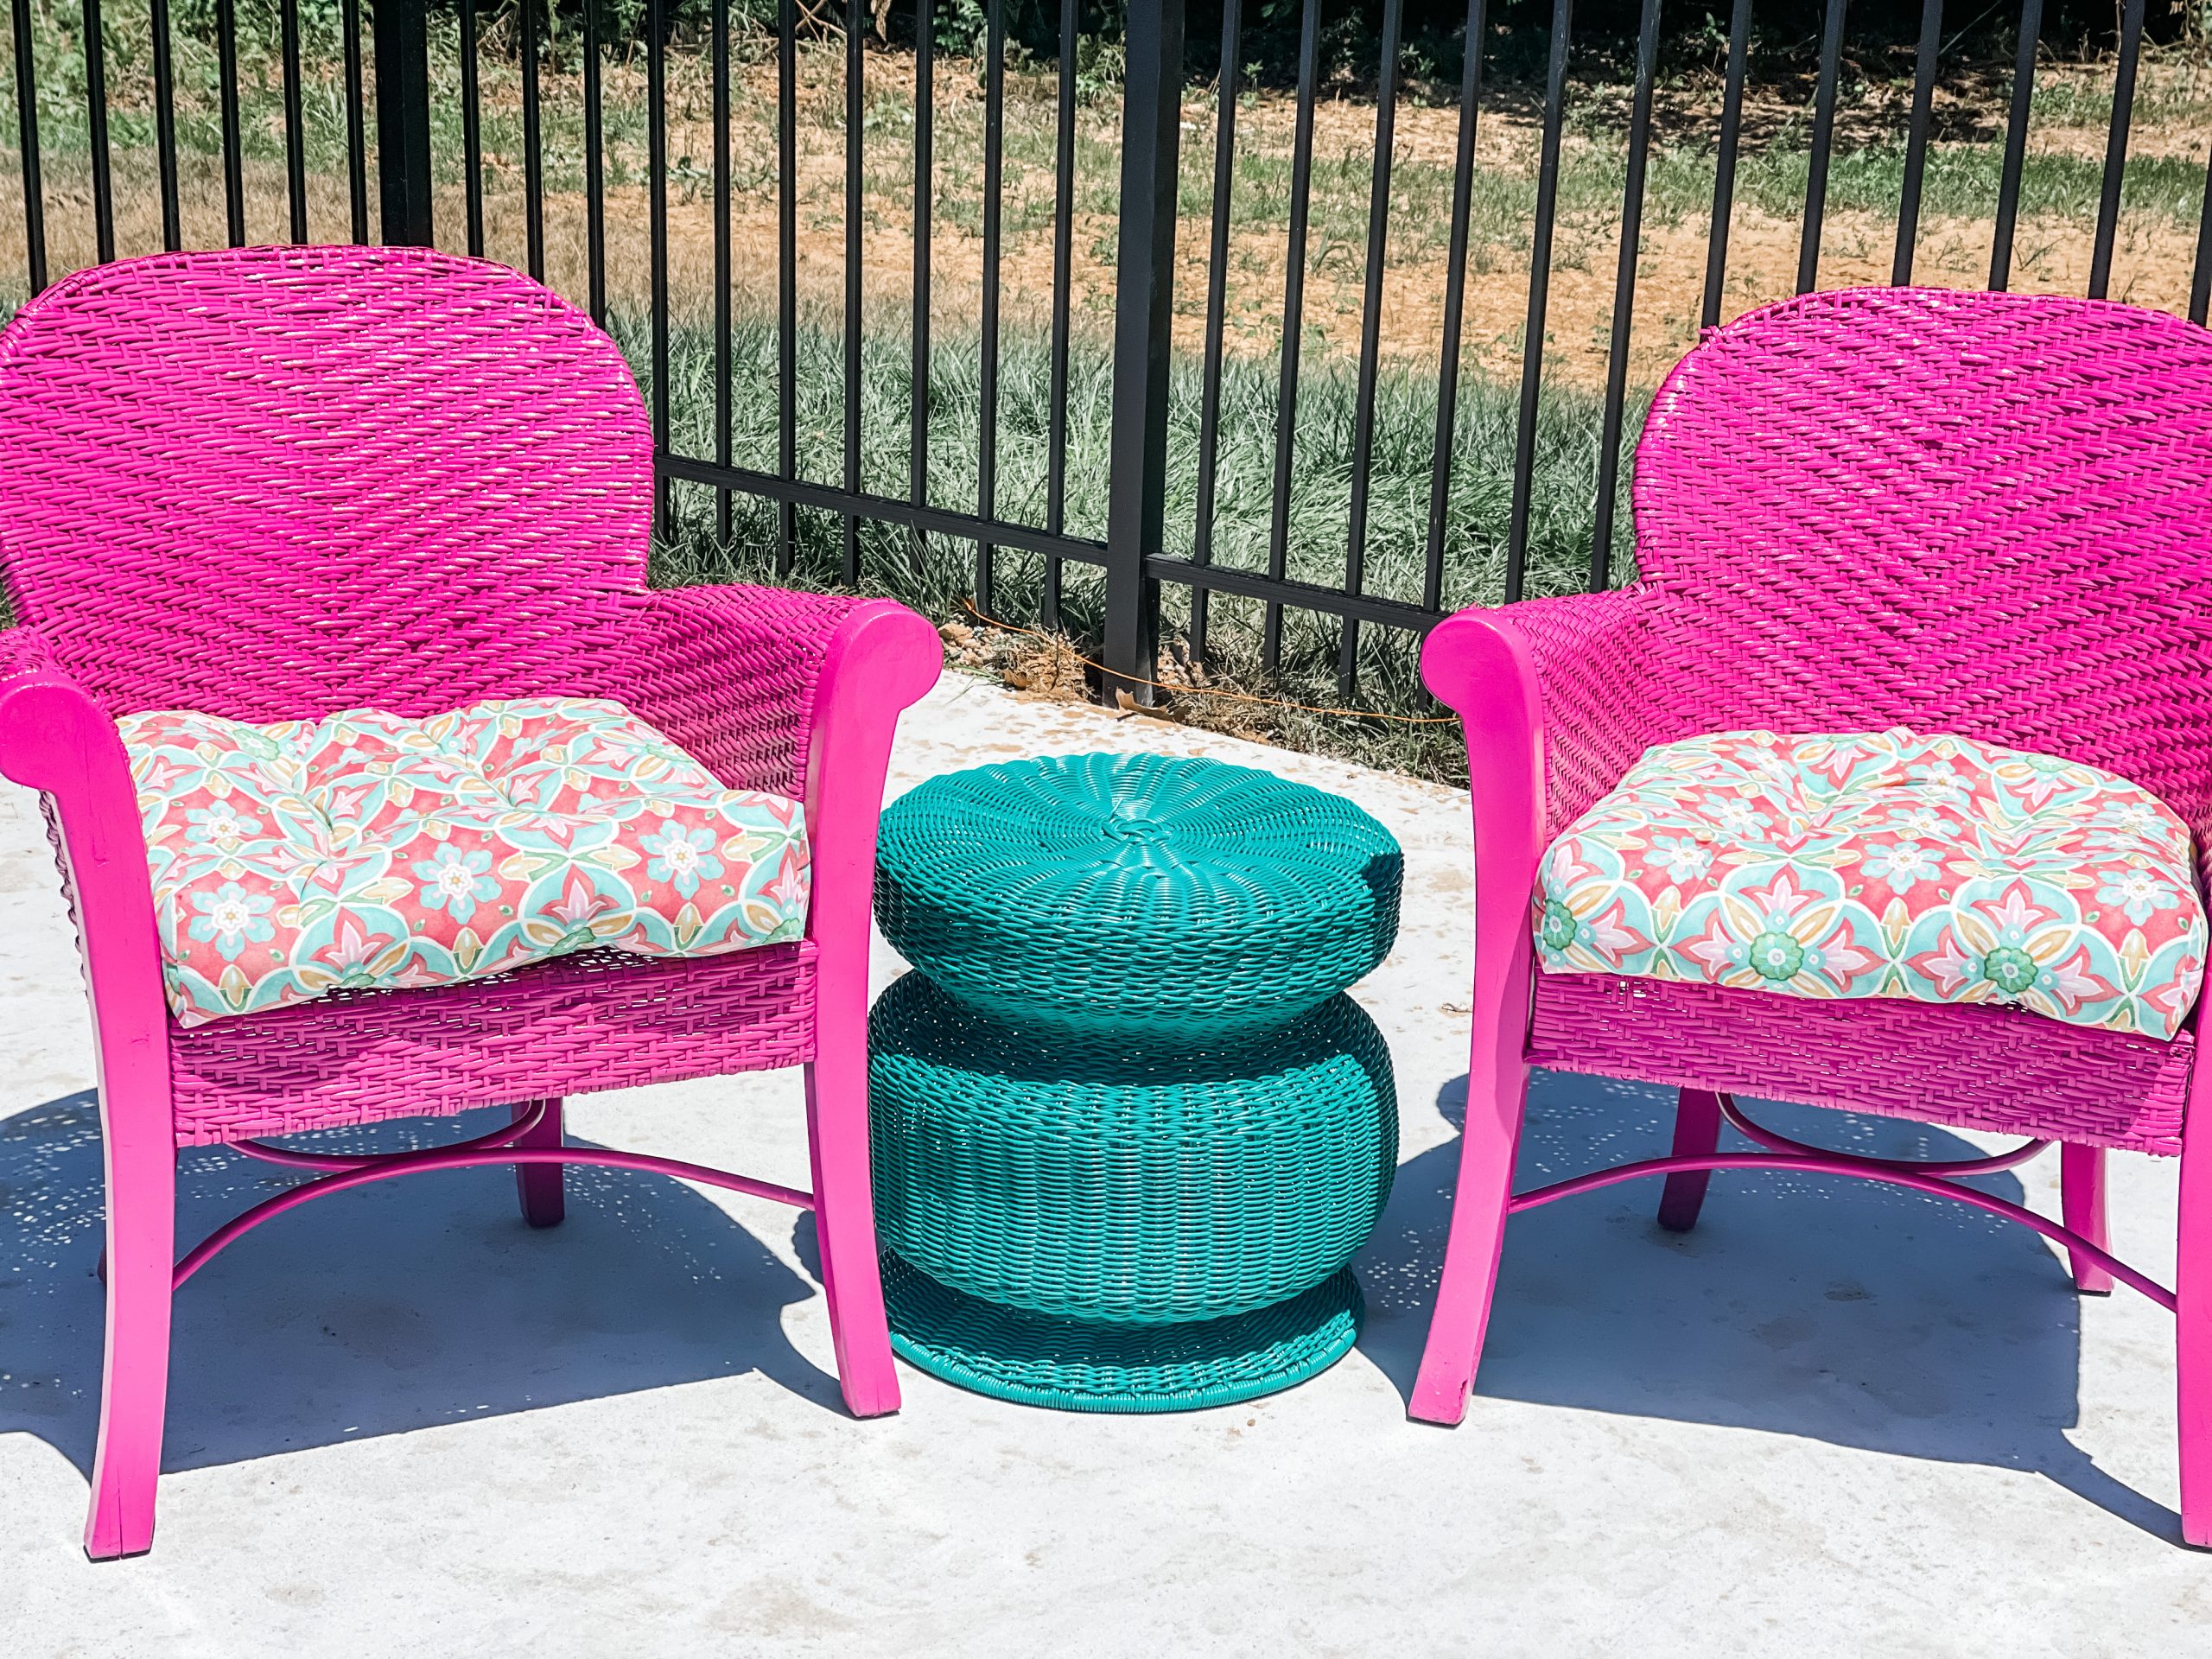 Furniture Makeover: Spray Painting Wood Chairs